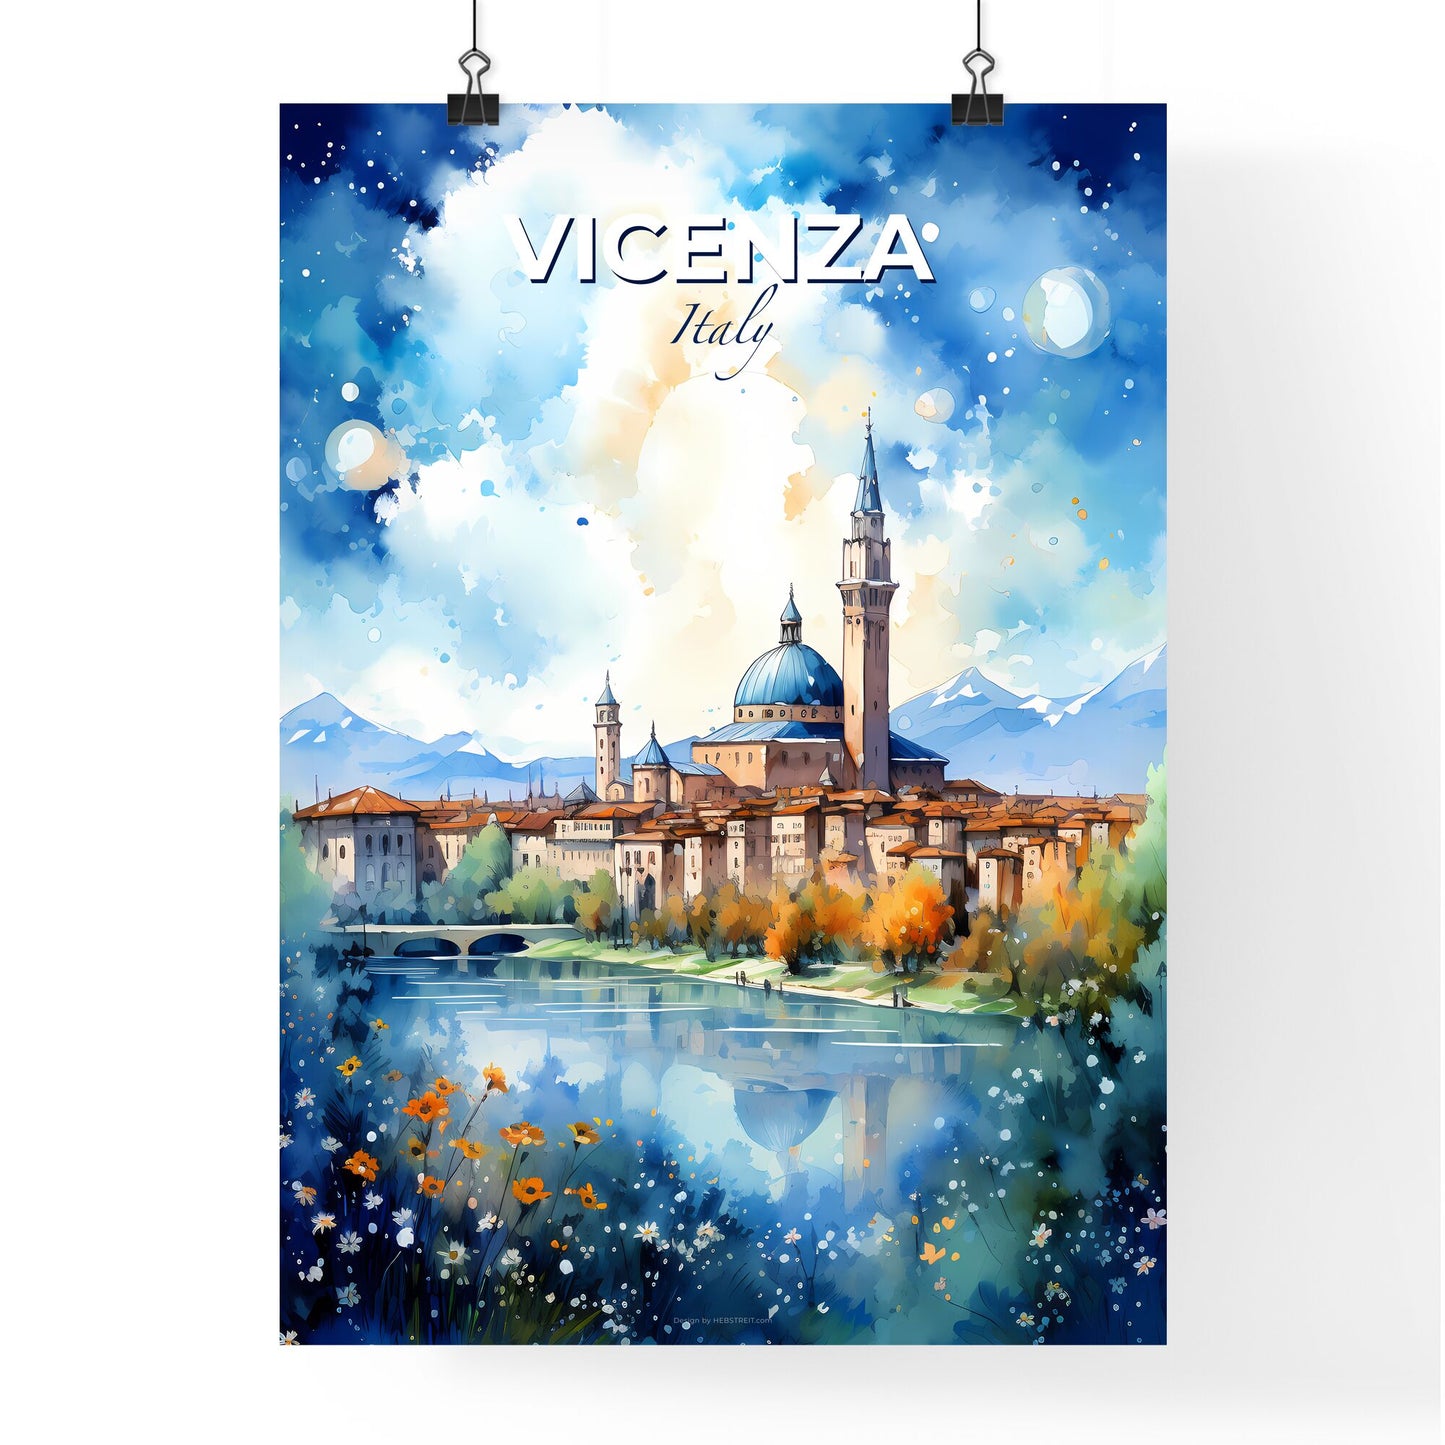 Vicenza Italy Skyline - A Watercolor Painting Of A Castle And A River - Customizable Travel Gift Default Title